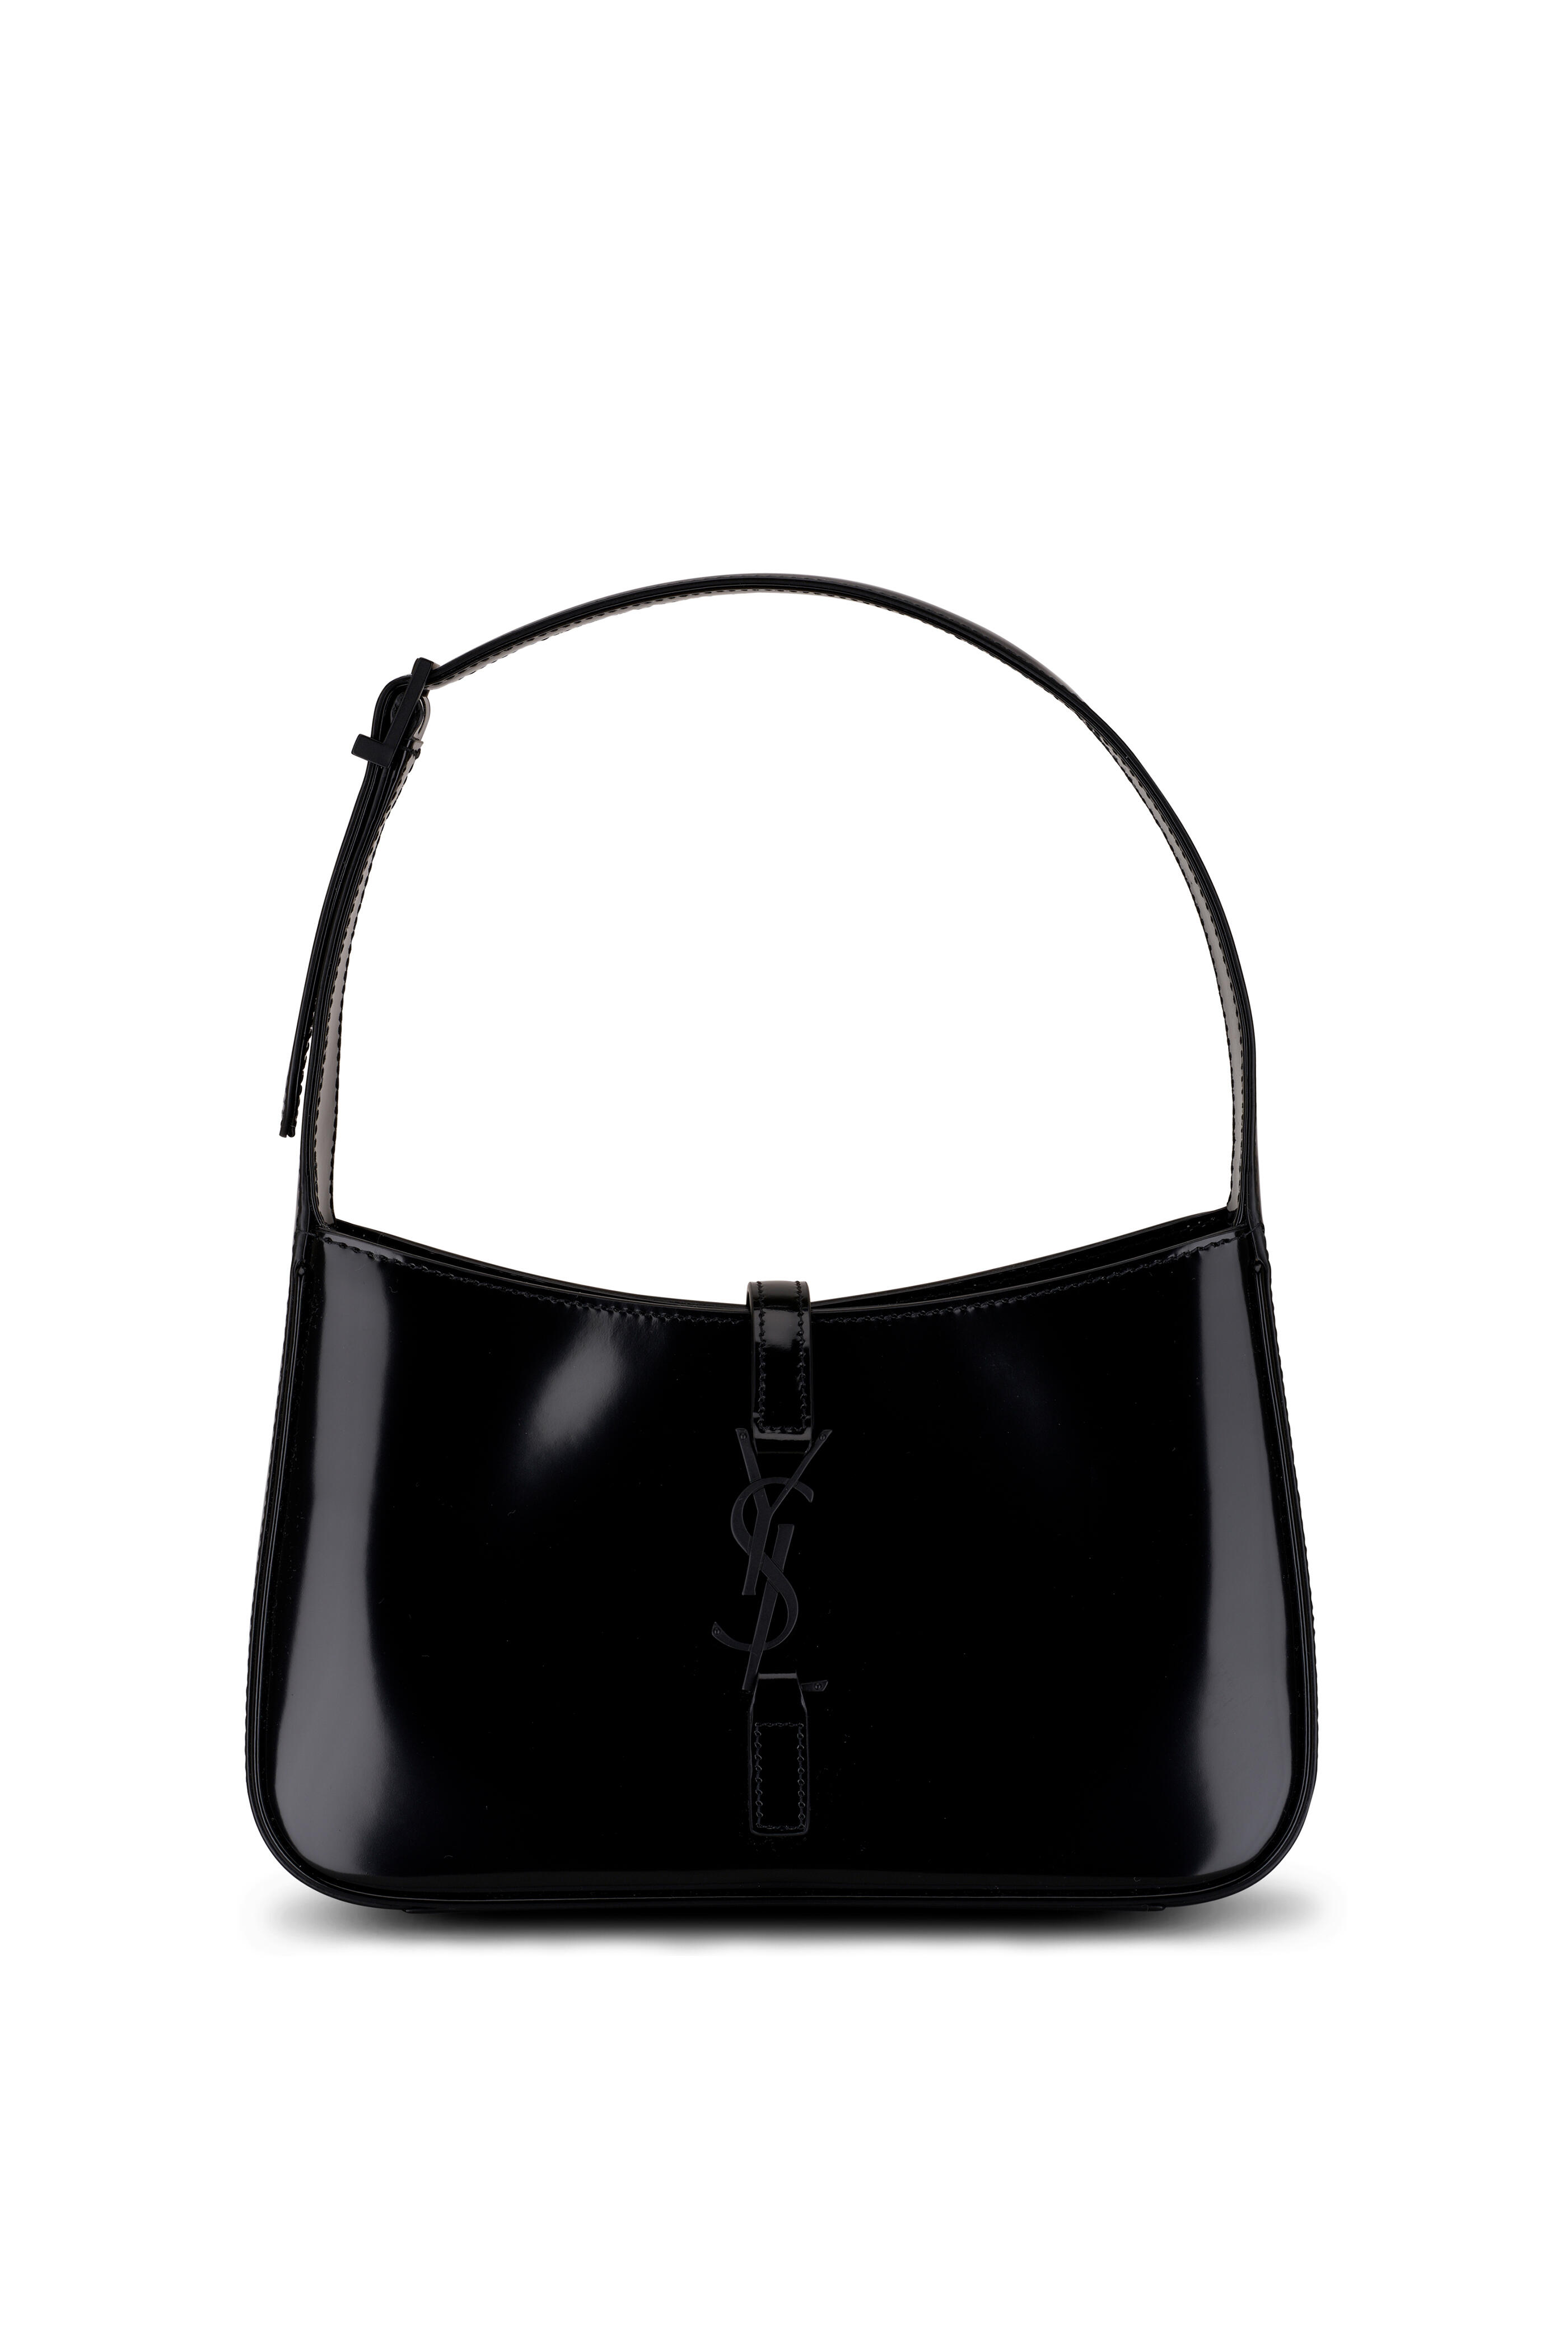 Le 5 A 7 Small Leather Tote Bag in Black - Saint Laurent